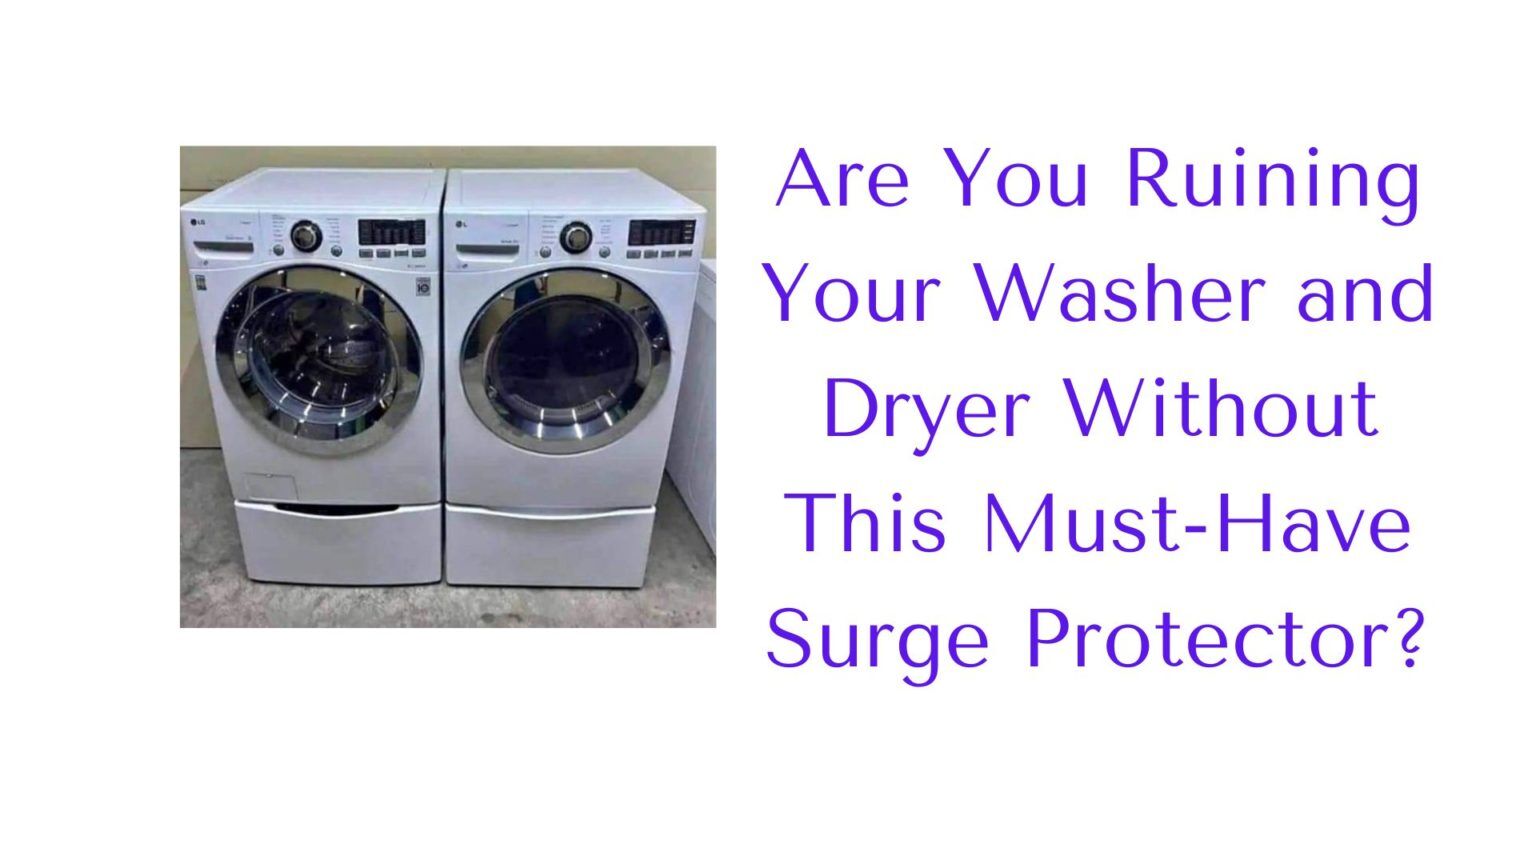 Are You Ruining Your Washer And Dryer Without This Must-Have Surge ...